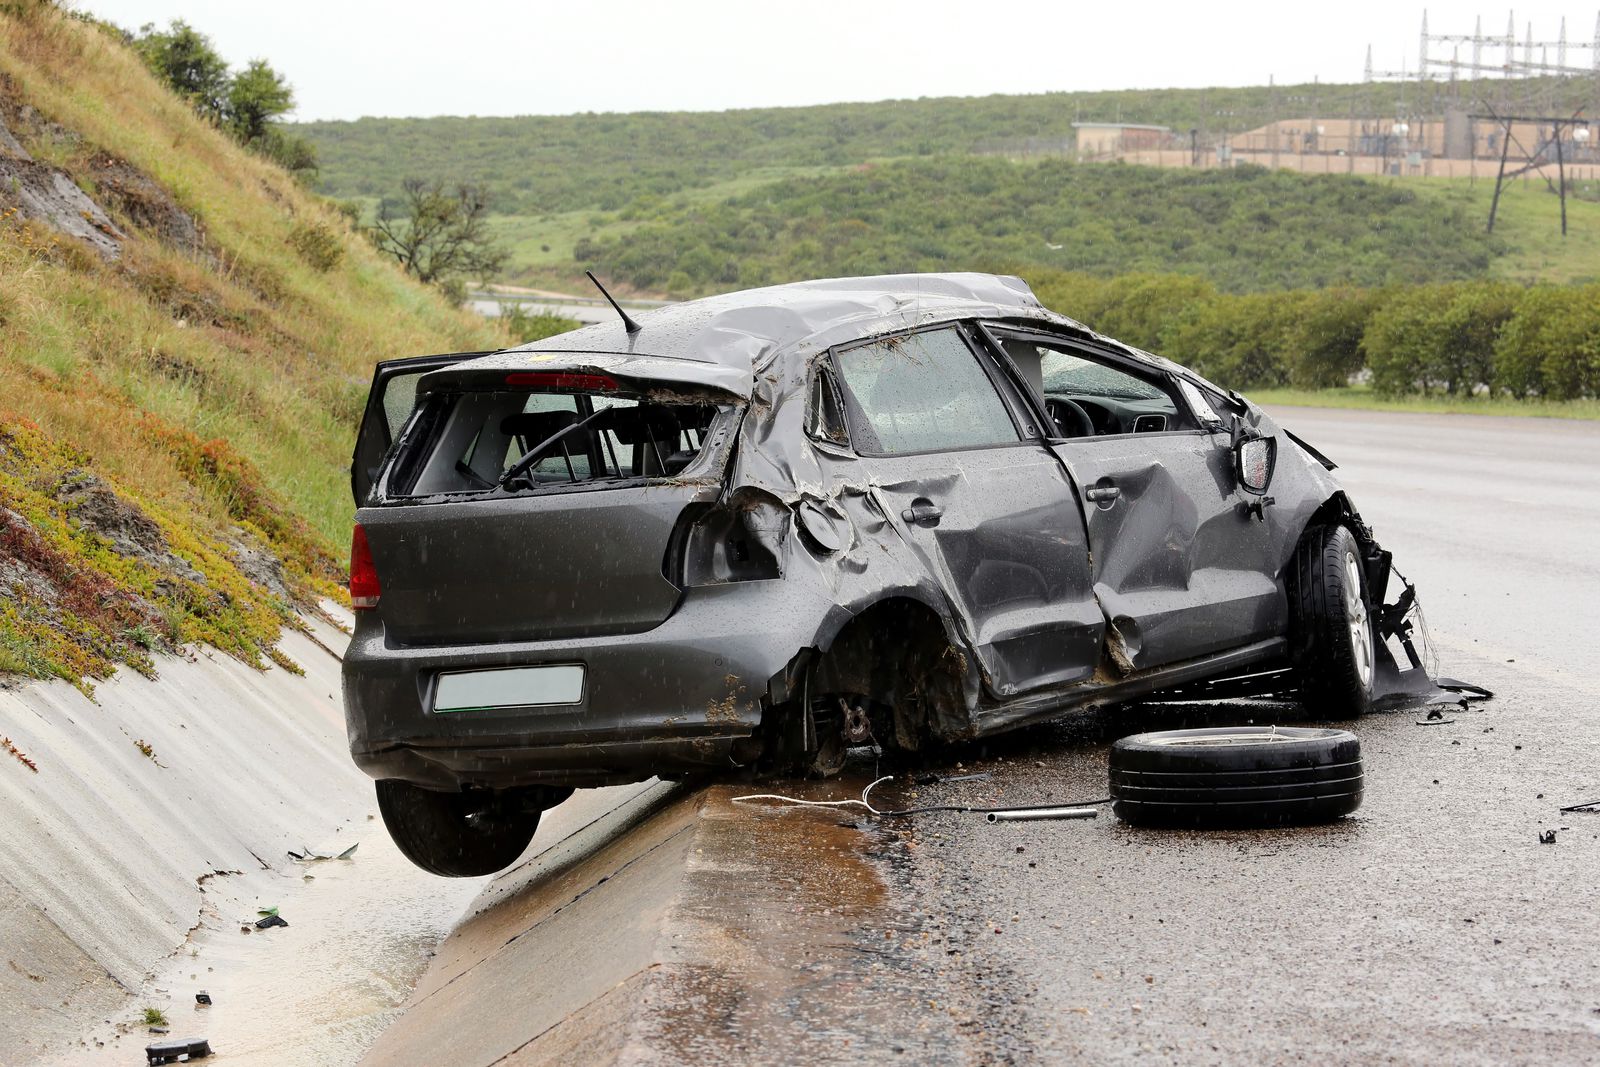 How long does a car accident stay on your insurance record?